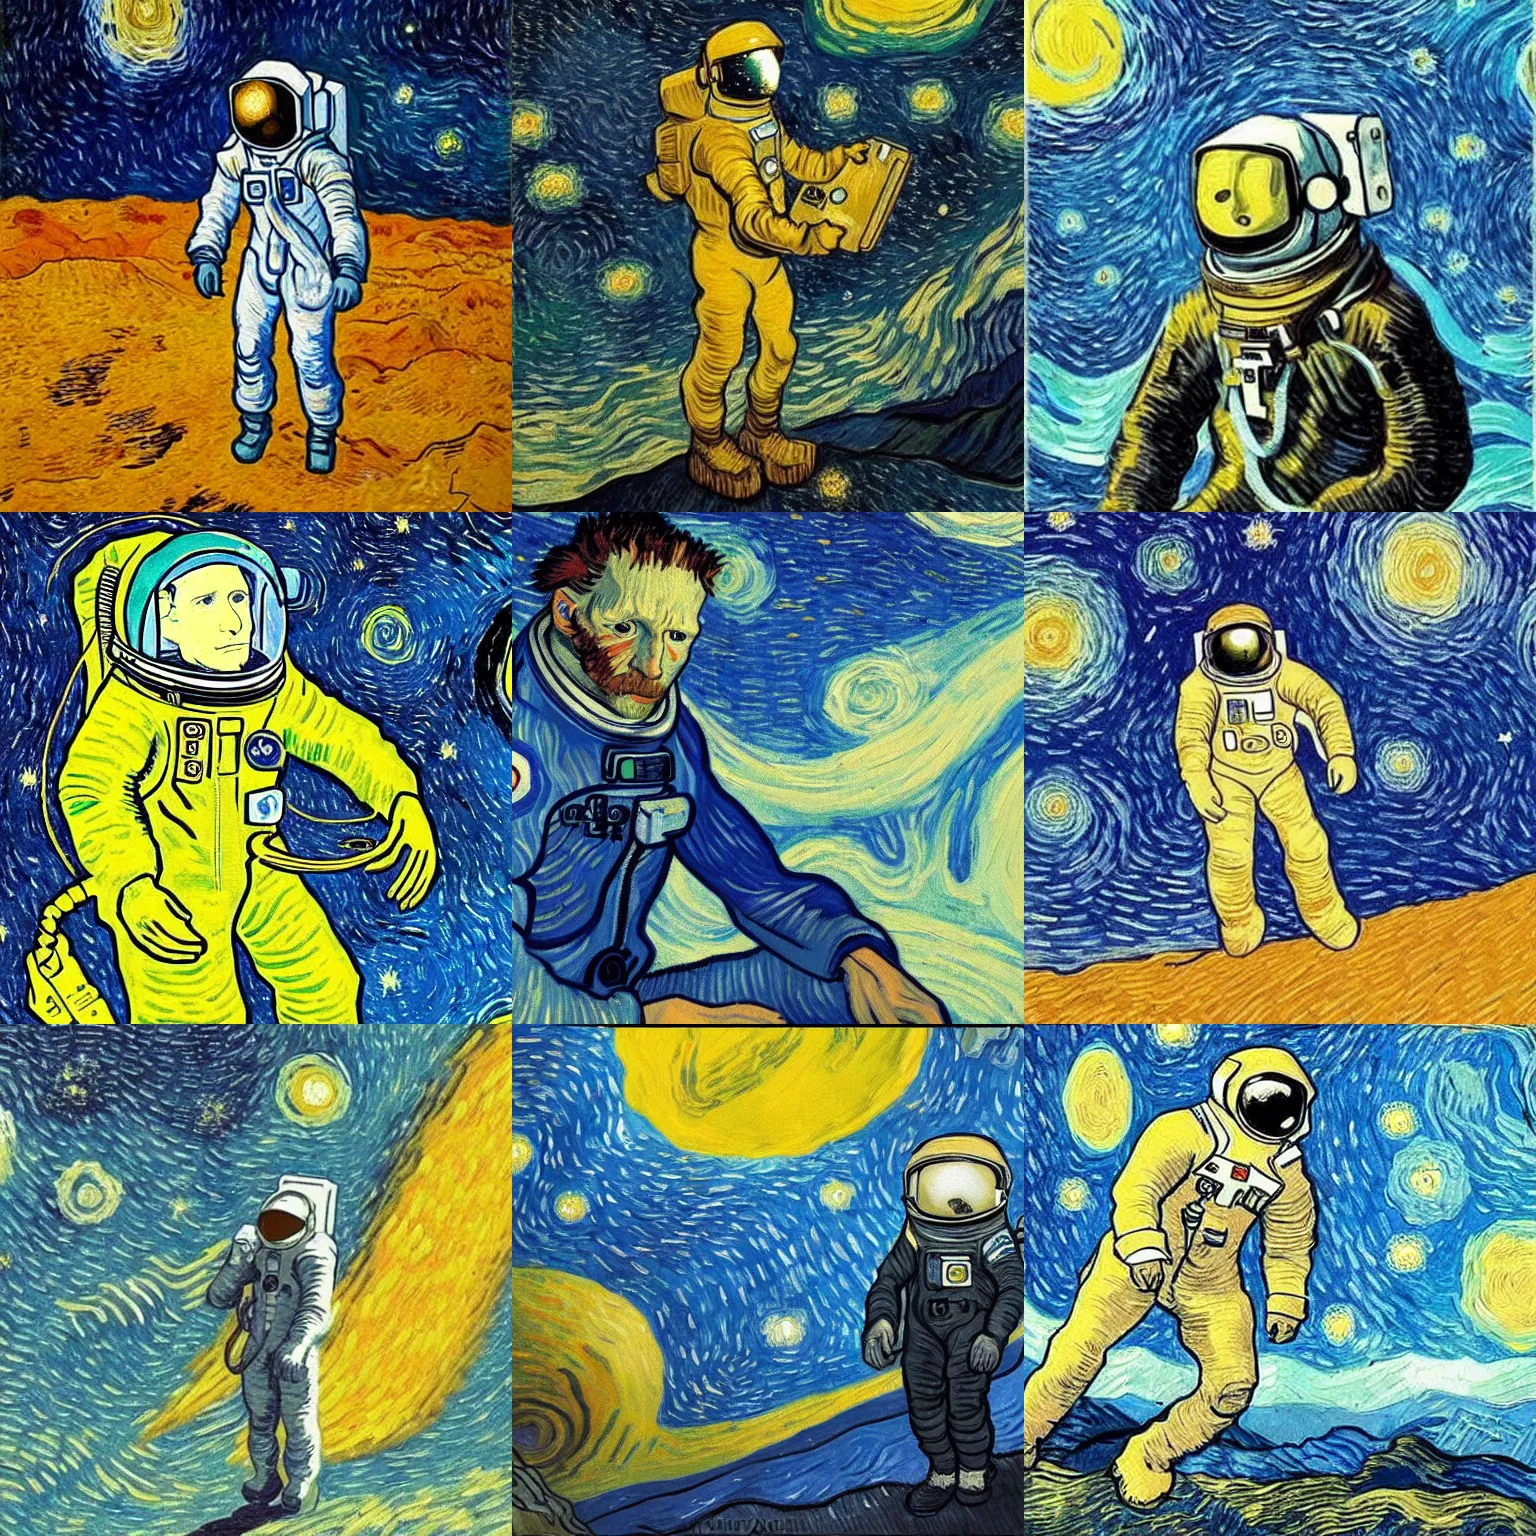 Prompt: Astronaut Lonely in the Galaxy - a painting by Van Gogh. very beautiful, HD detailed. Sad lighting, miserable emotions. The Astronaut is lost in the Galaxy.